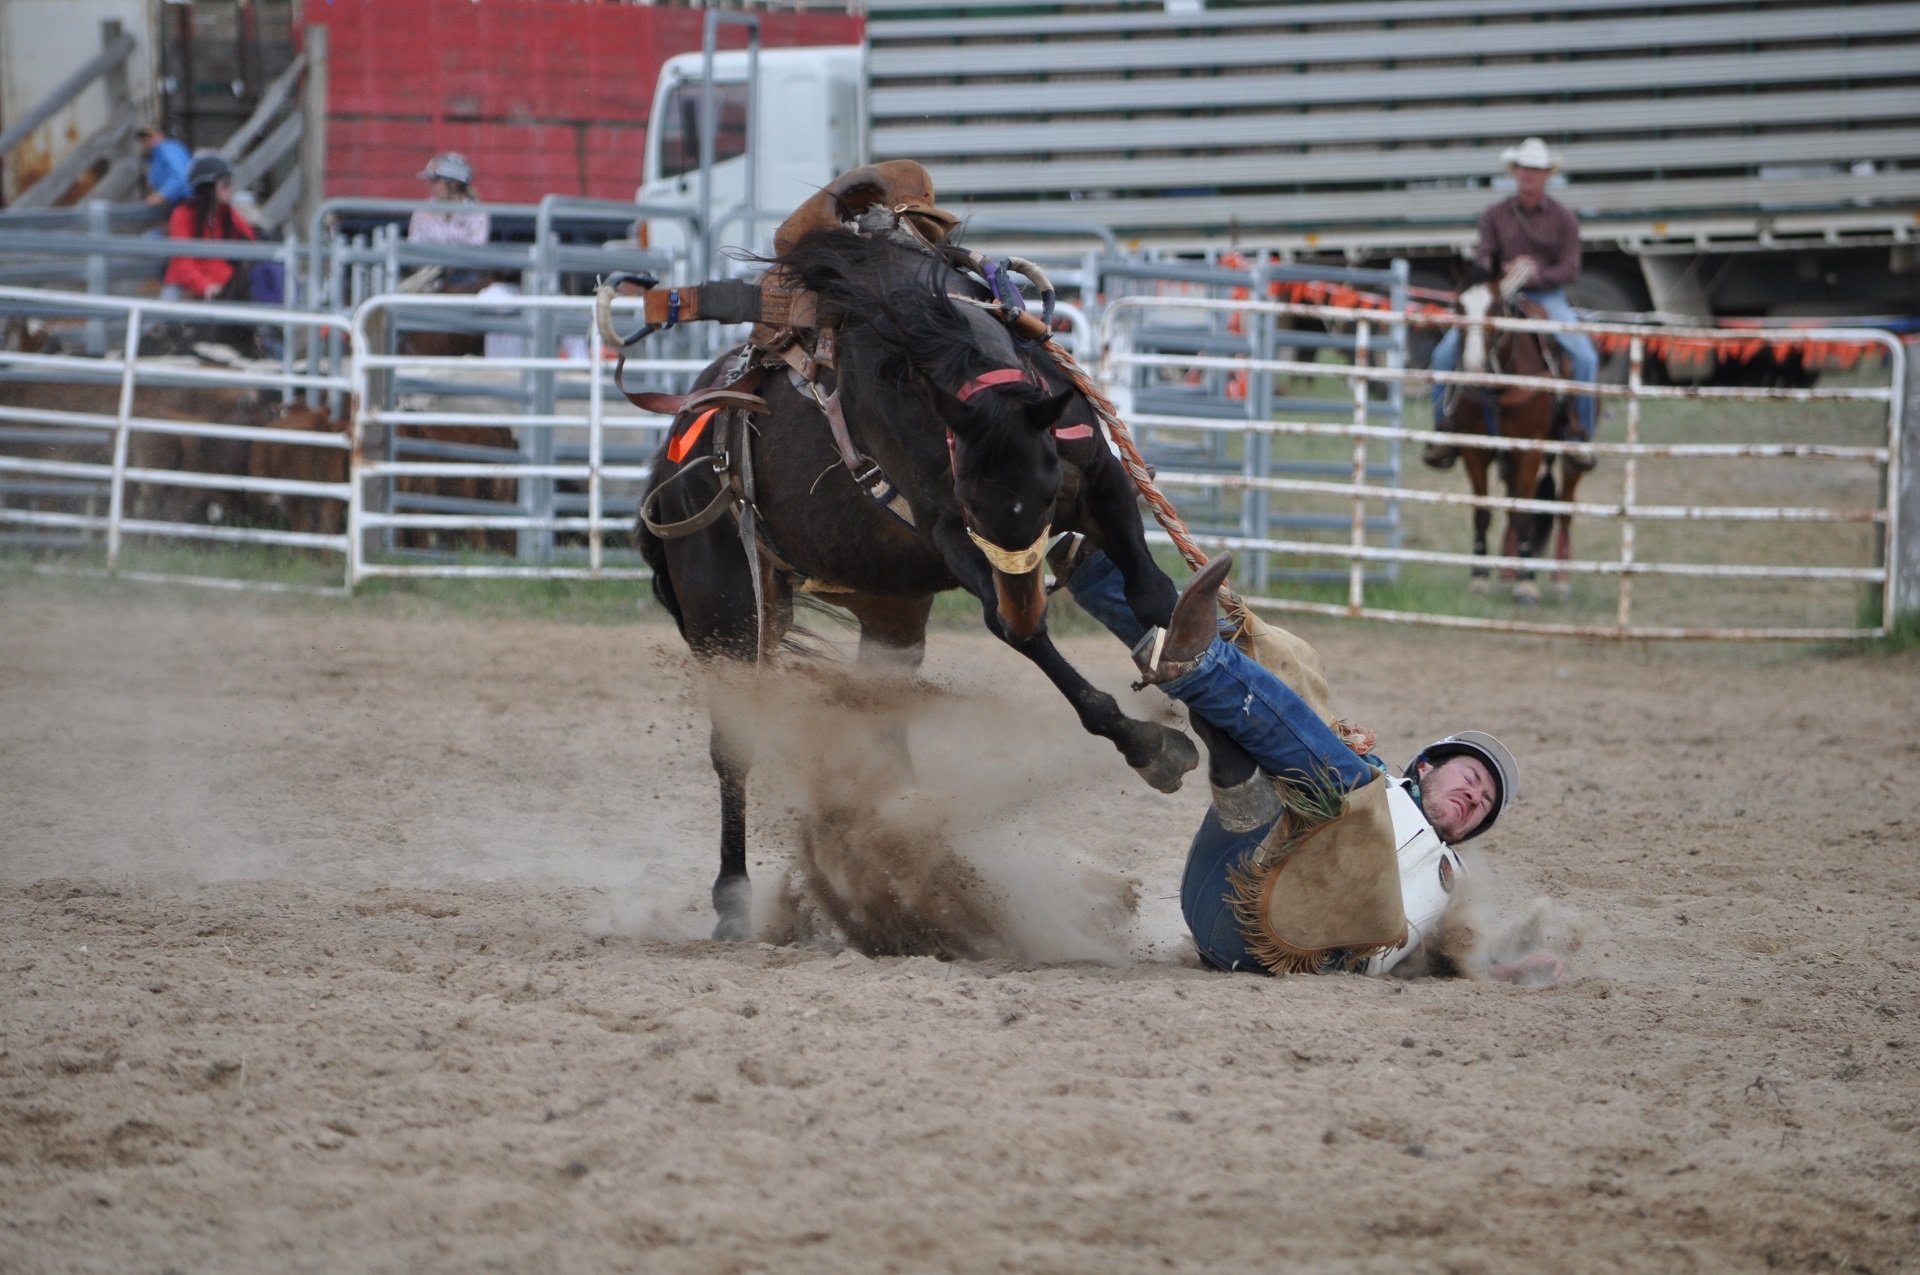 Being thrown off a bucking bronco at a rodeo by skeeze